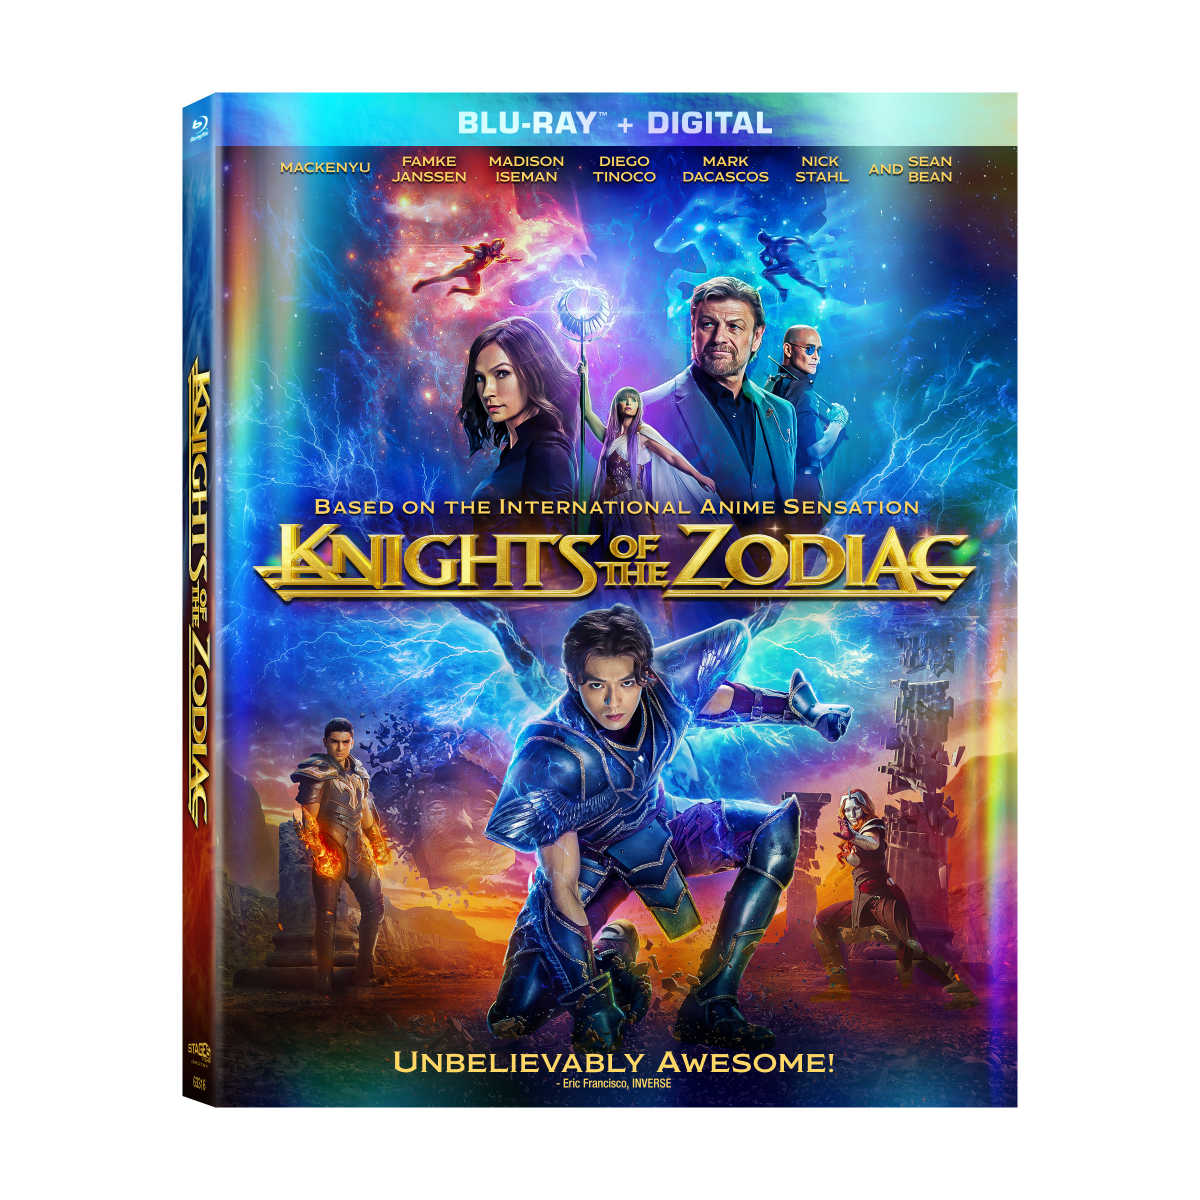 The Knights of the Zodiac Blu-ray is the perfect way to experience this classic anime series, so you will want to add it to your home collection.